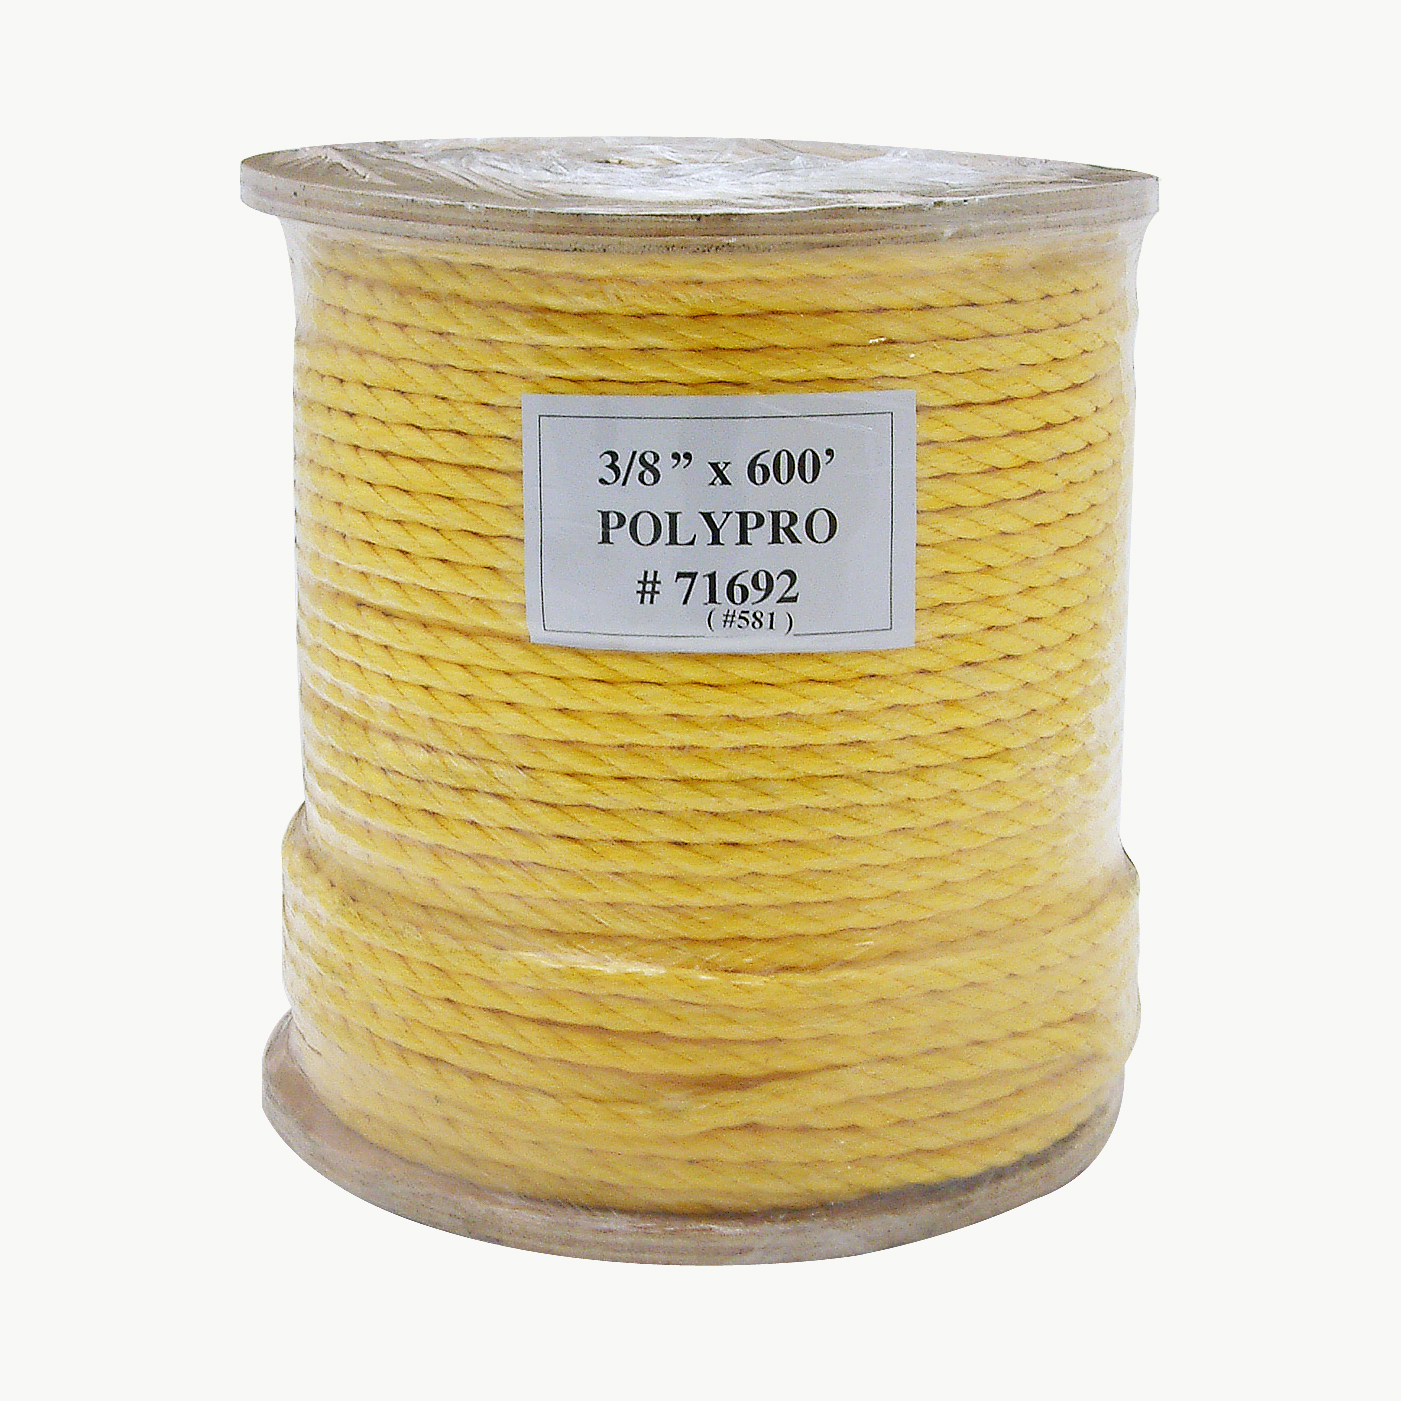 JVCC PolyPro Twisted Rope